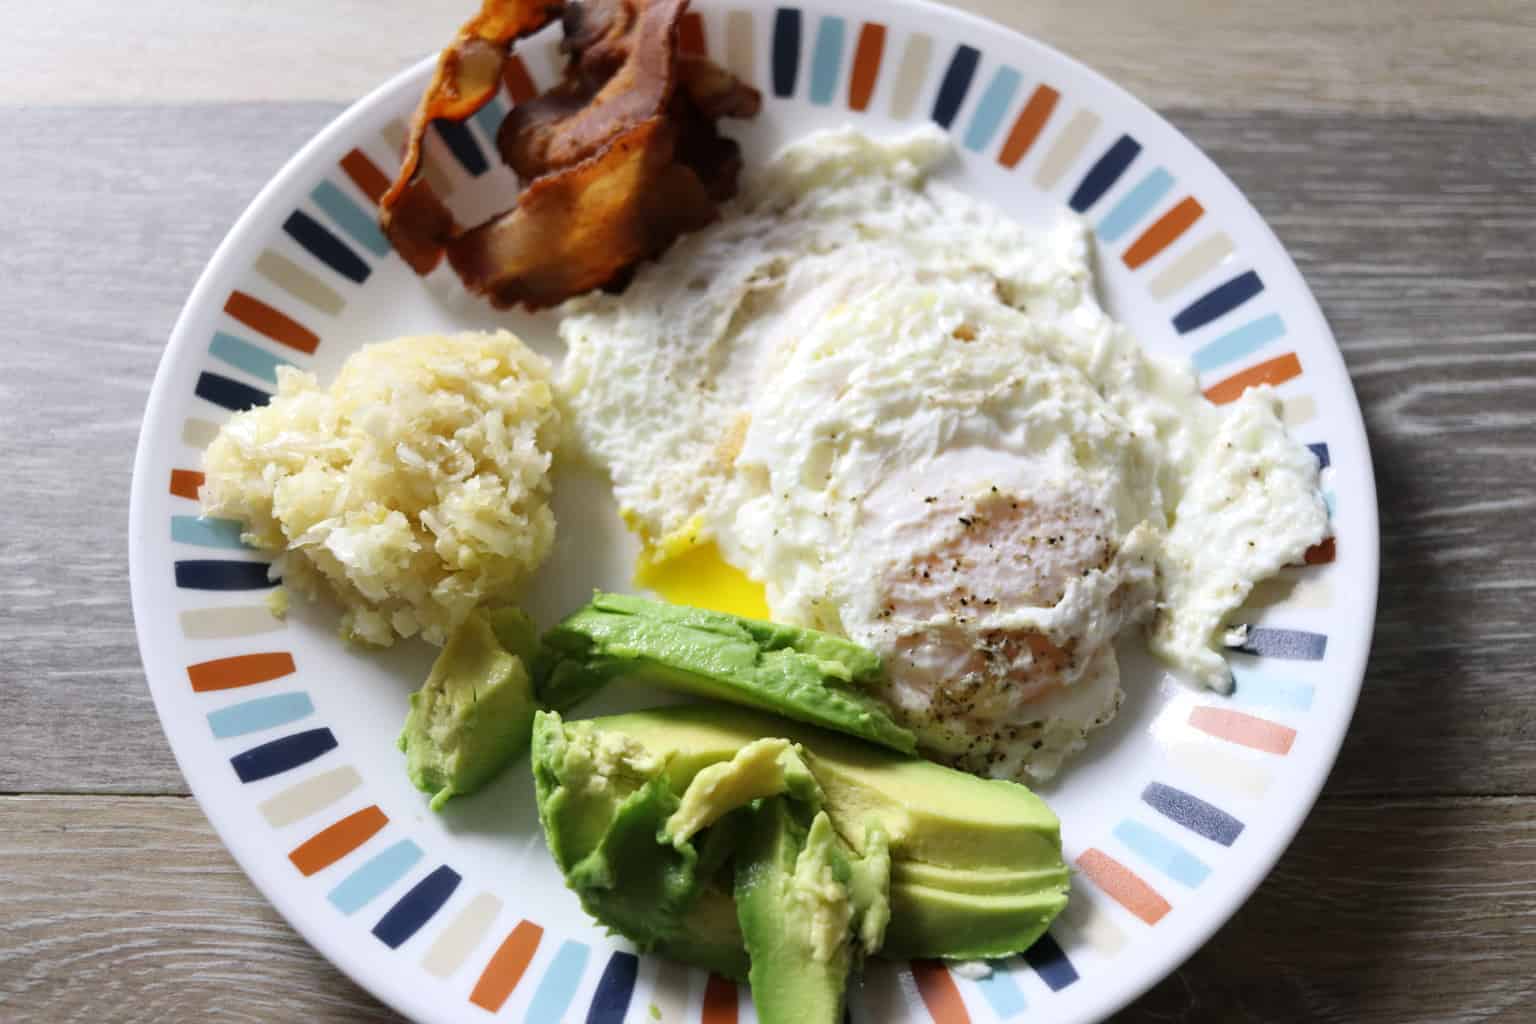 Fried egg, avocado and bacon on plate.